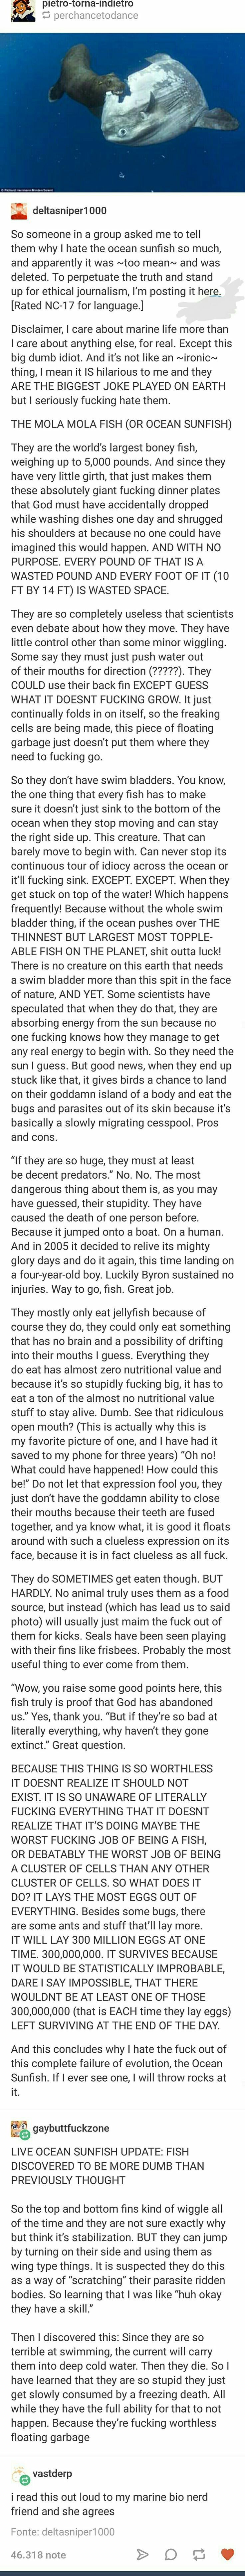 I always knew fish were stupid, but this takes the cake